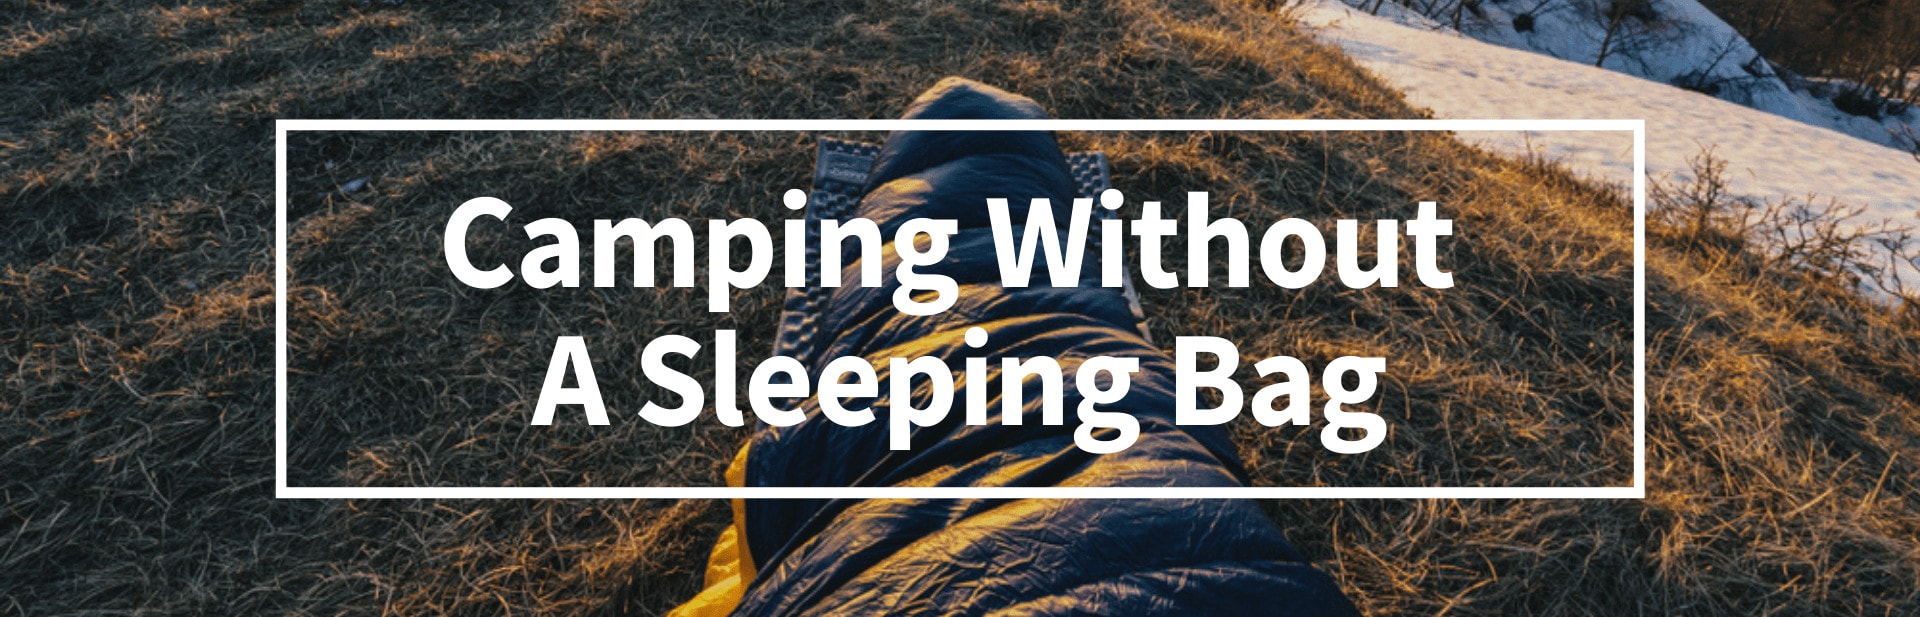 Can I Go Camping Without A Sleeping Bag? 8 Sleeping Bag Alternatives To Try